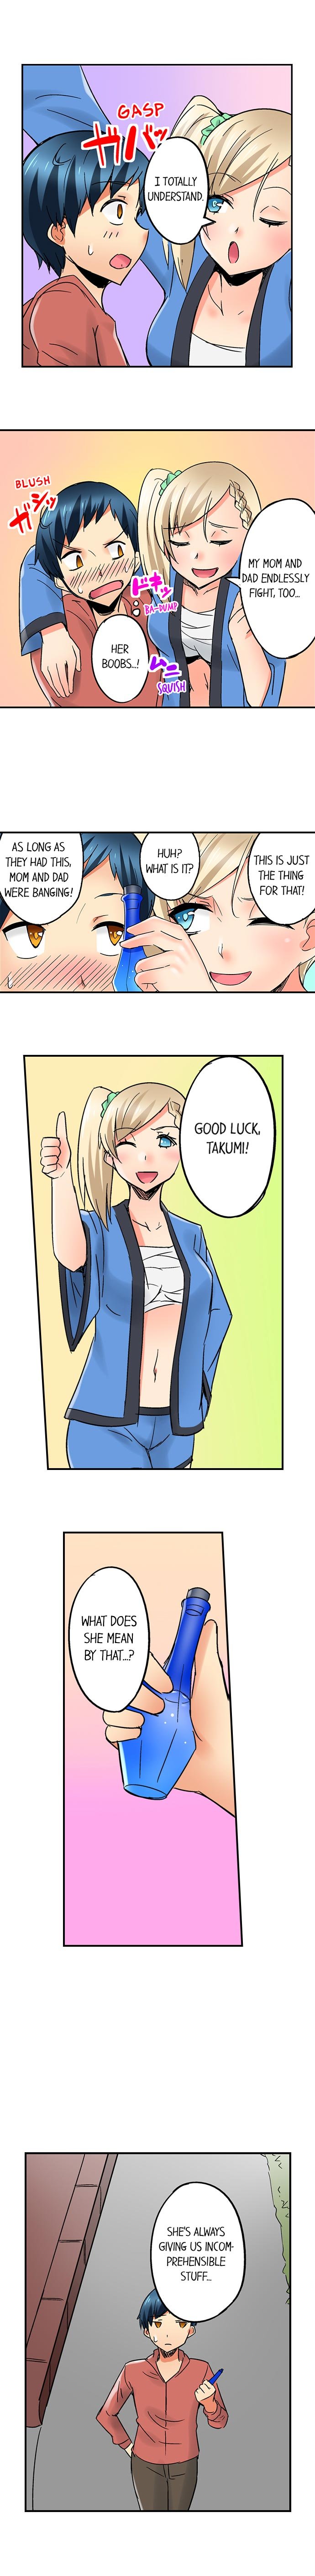 excited-by-my-tyrant-sister-chap-4-8